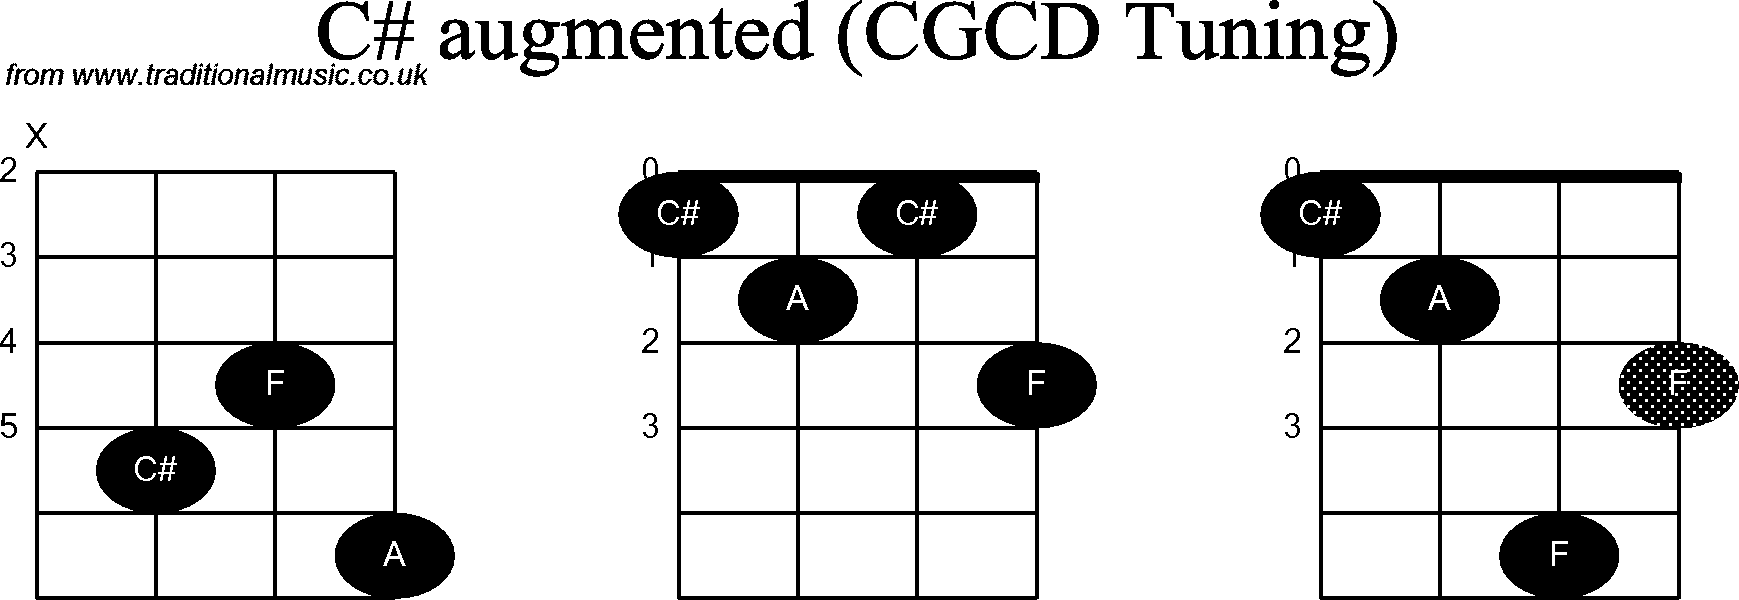 Chord diagrams for Banjo(Double C) C# Augmented